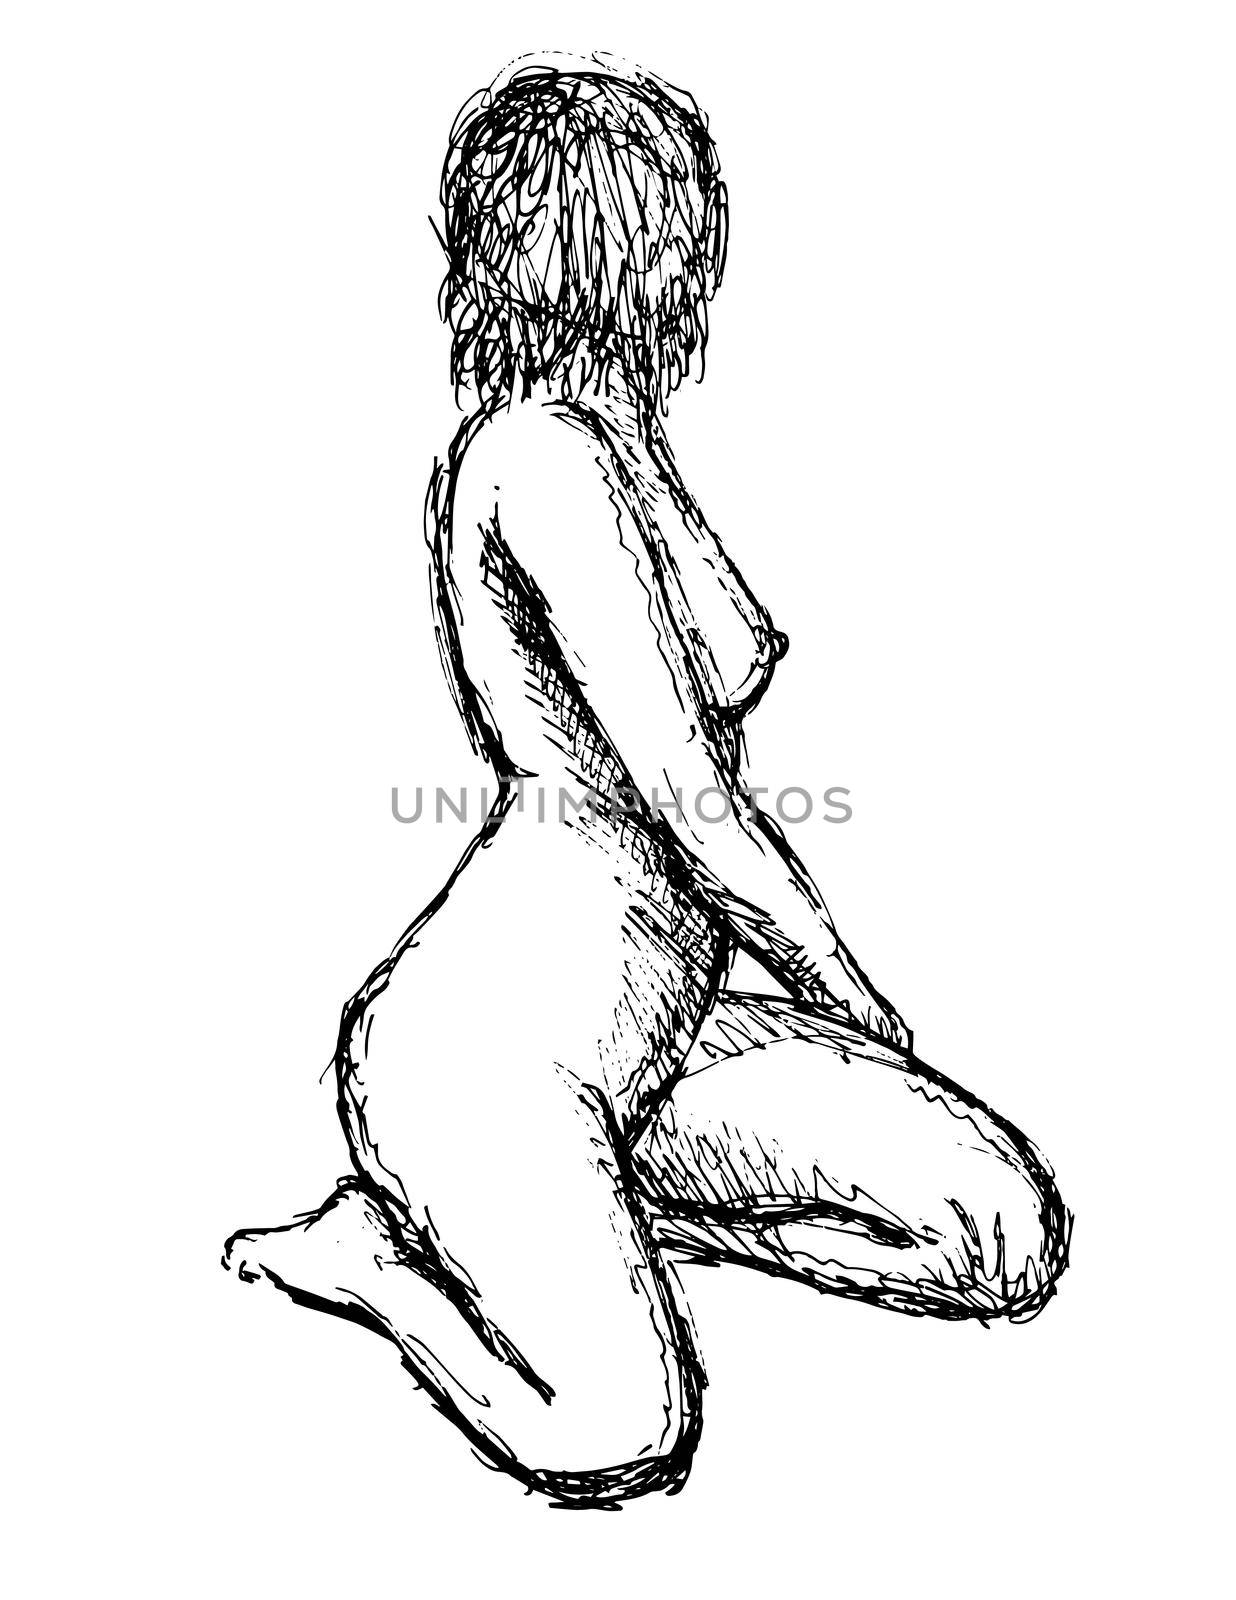 Nude Female Human Figure Sitting on Knees Doodle Art Continuous Line Drawing  by patrimonio